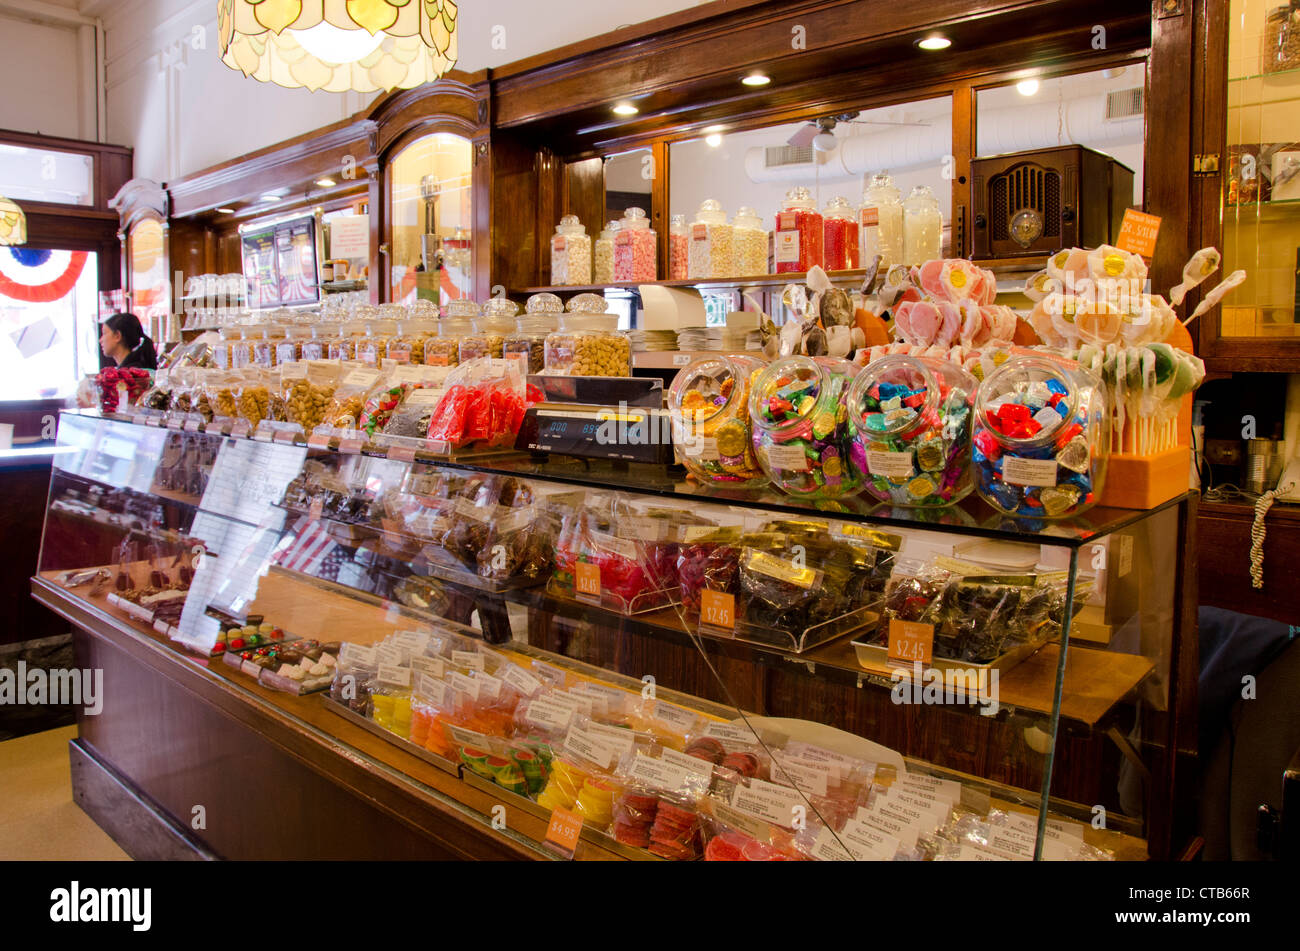 https://c8.alamy.com/comp/CTB66R/wisconsin-manitowoc-downtown-8th-street-beerntsens-confectionery-historic-CTB66R.jpg